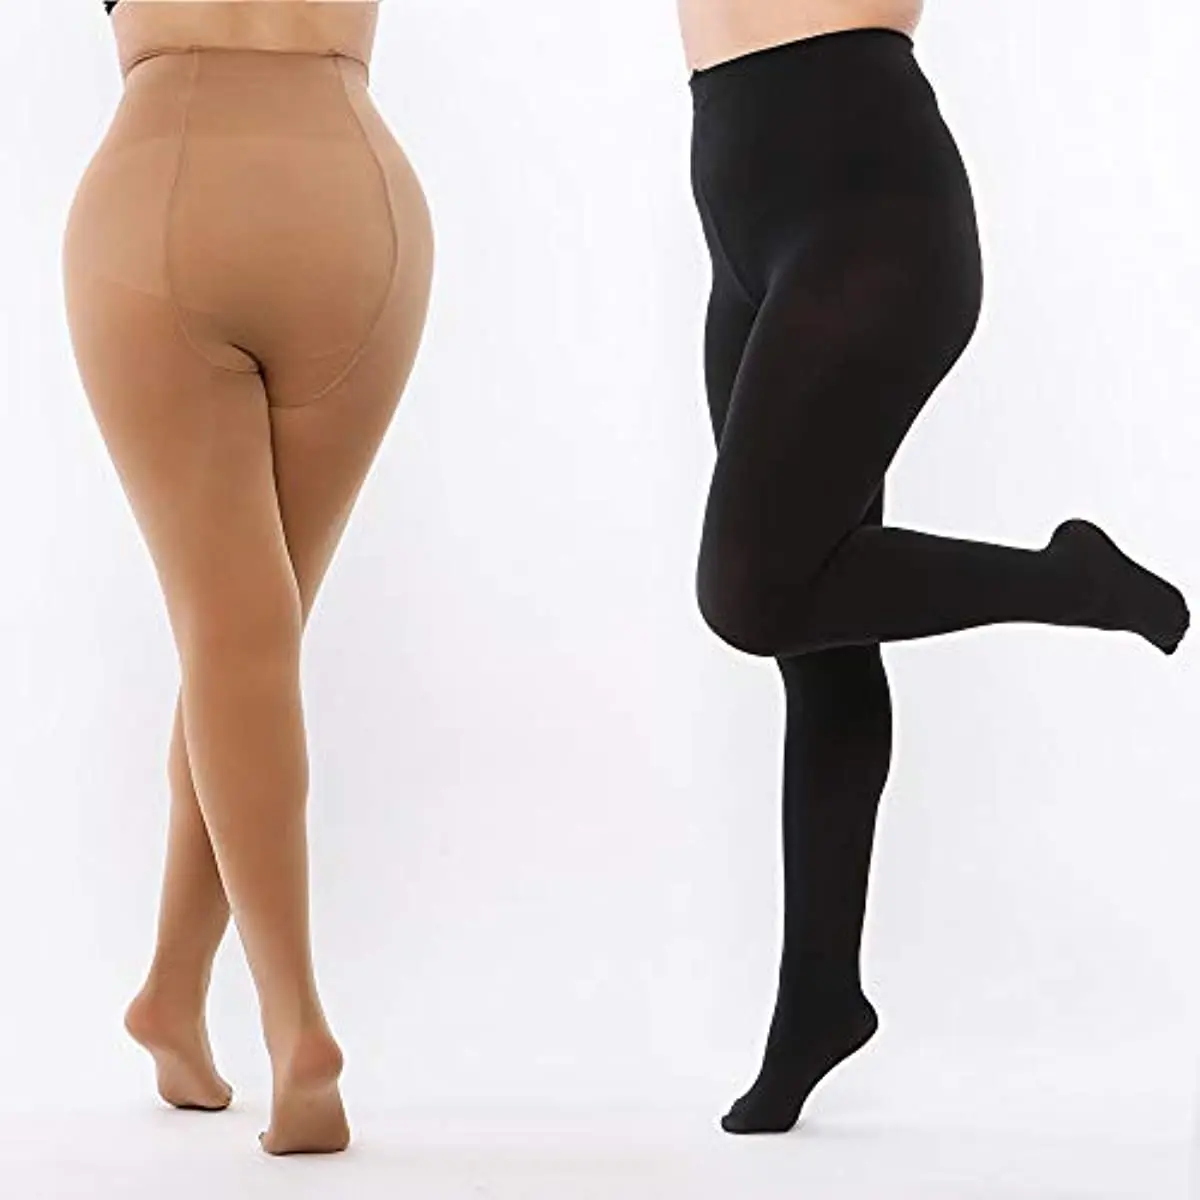 Plus Size Opaque Tights Control Top Pantyhose High Waist Tights for Women Compression Stockings Pantyhose Women 15-20mmHg